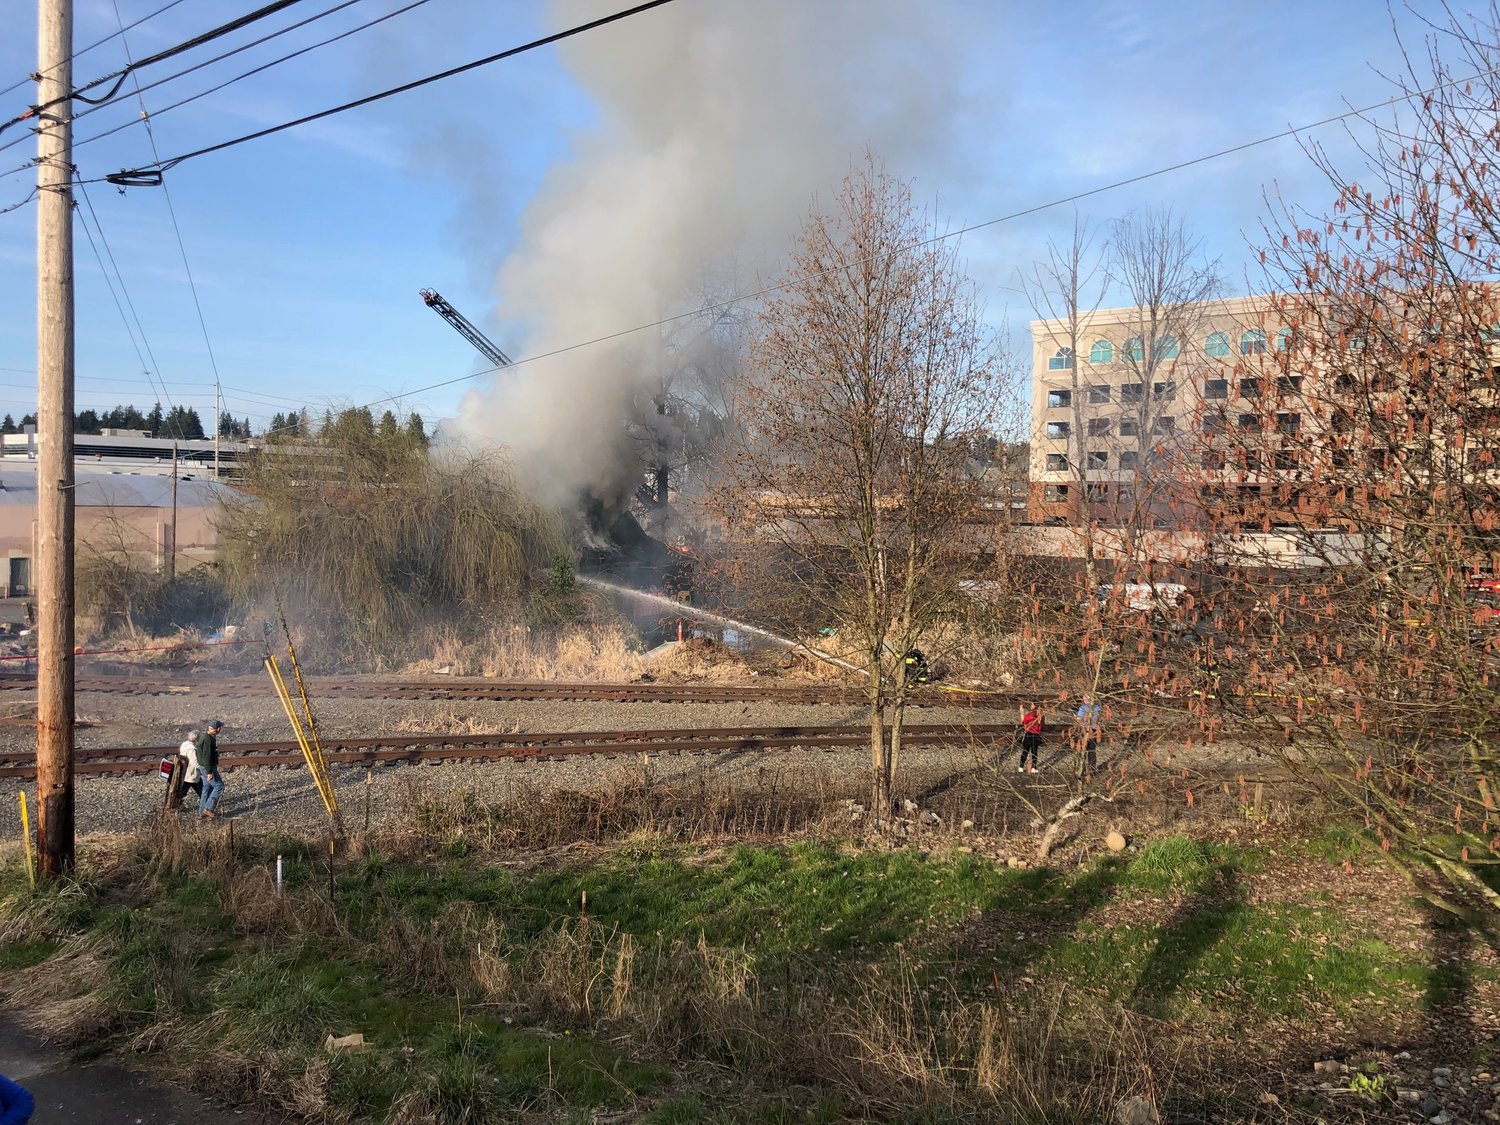 This is another view of the fire at 511 7th Avenue SE in Olympia on Sat., March 18, 2023 at approximately 5:50 p.m.